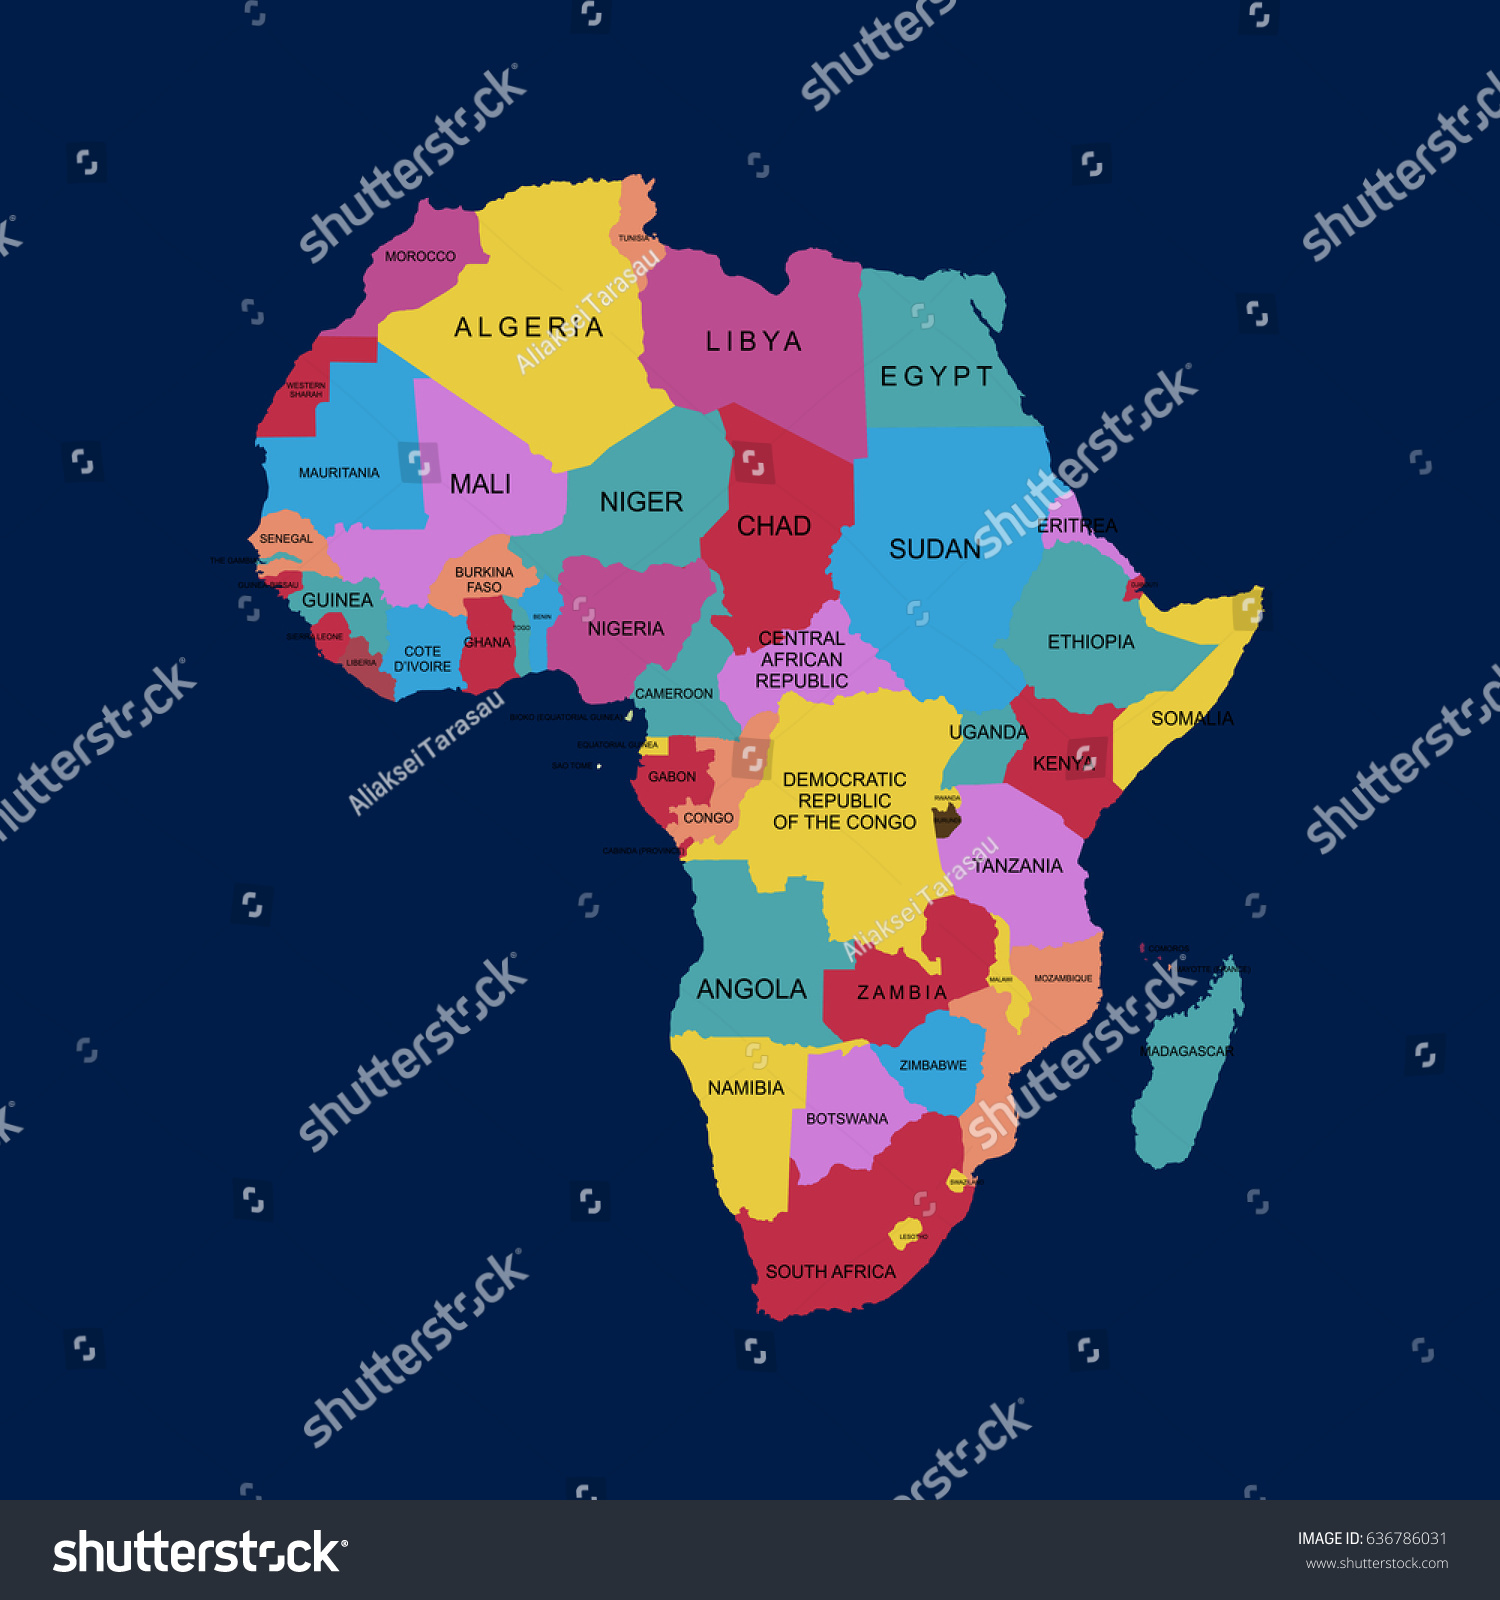 Map Of Africa Vector Illustration Royalty Free Stock Vector 636786031 7538